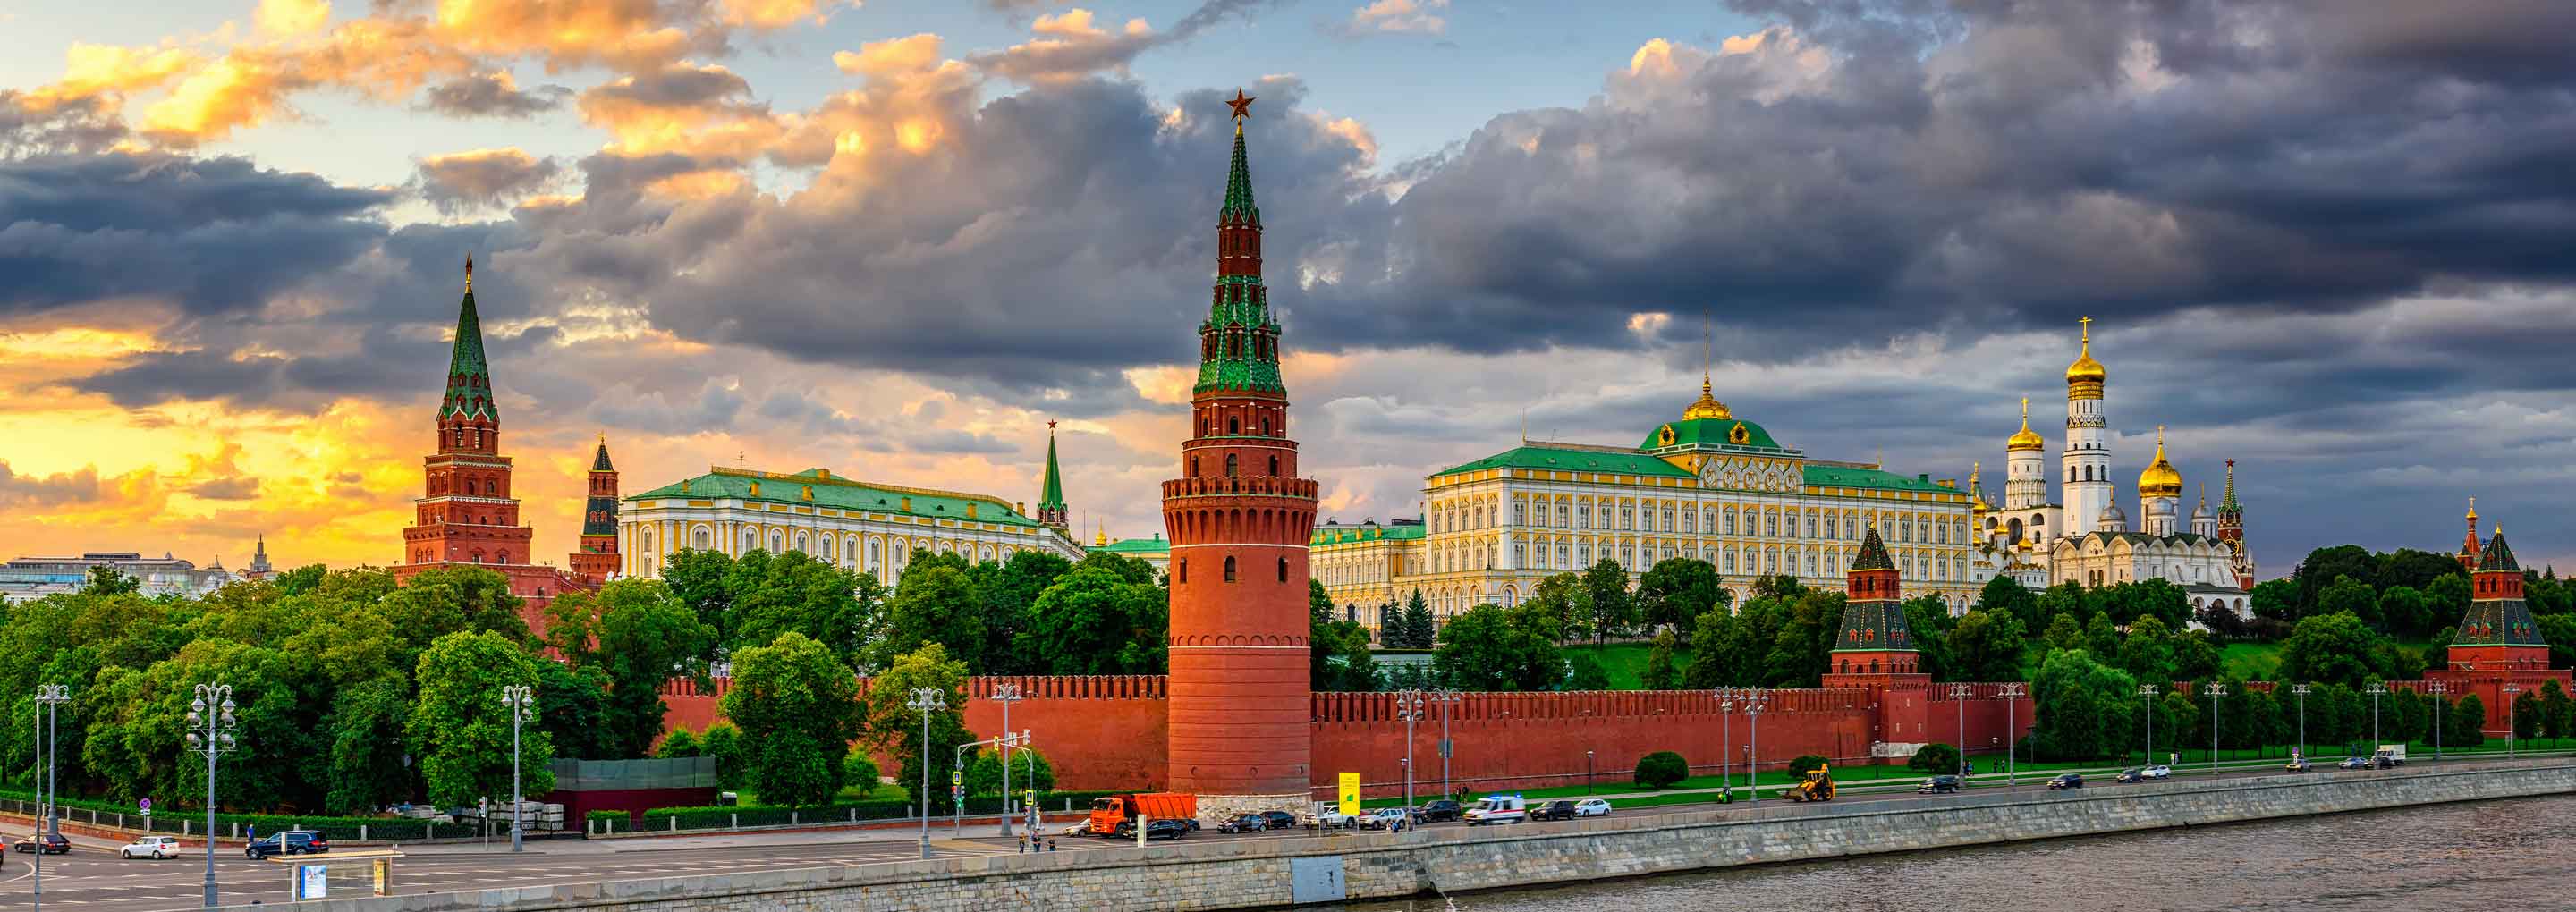 Kremlin towers and Grand Kremlin Palace in Moscow.